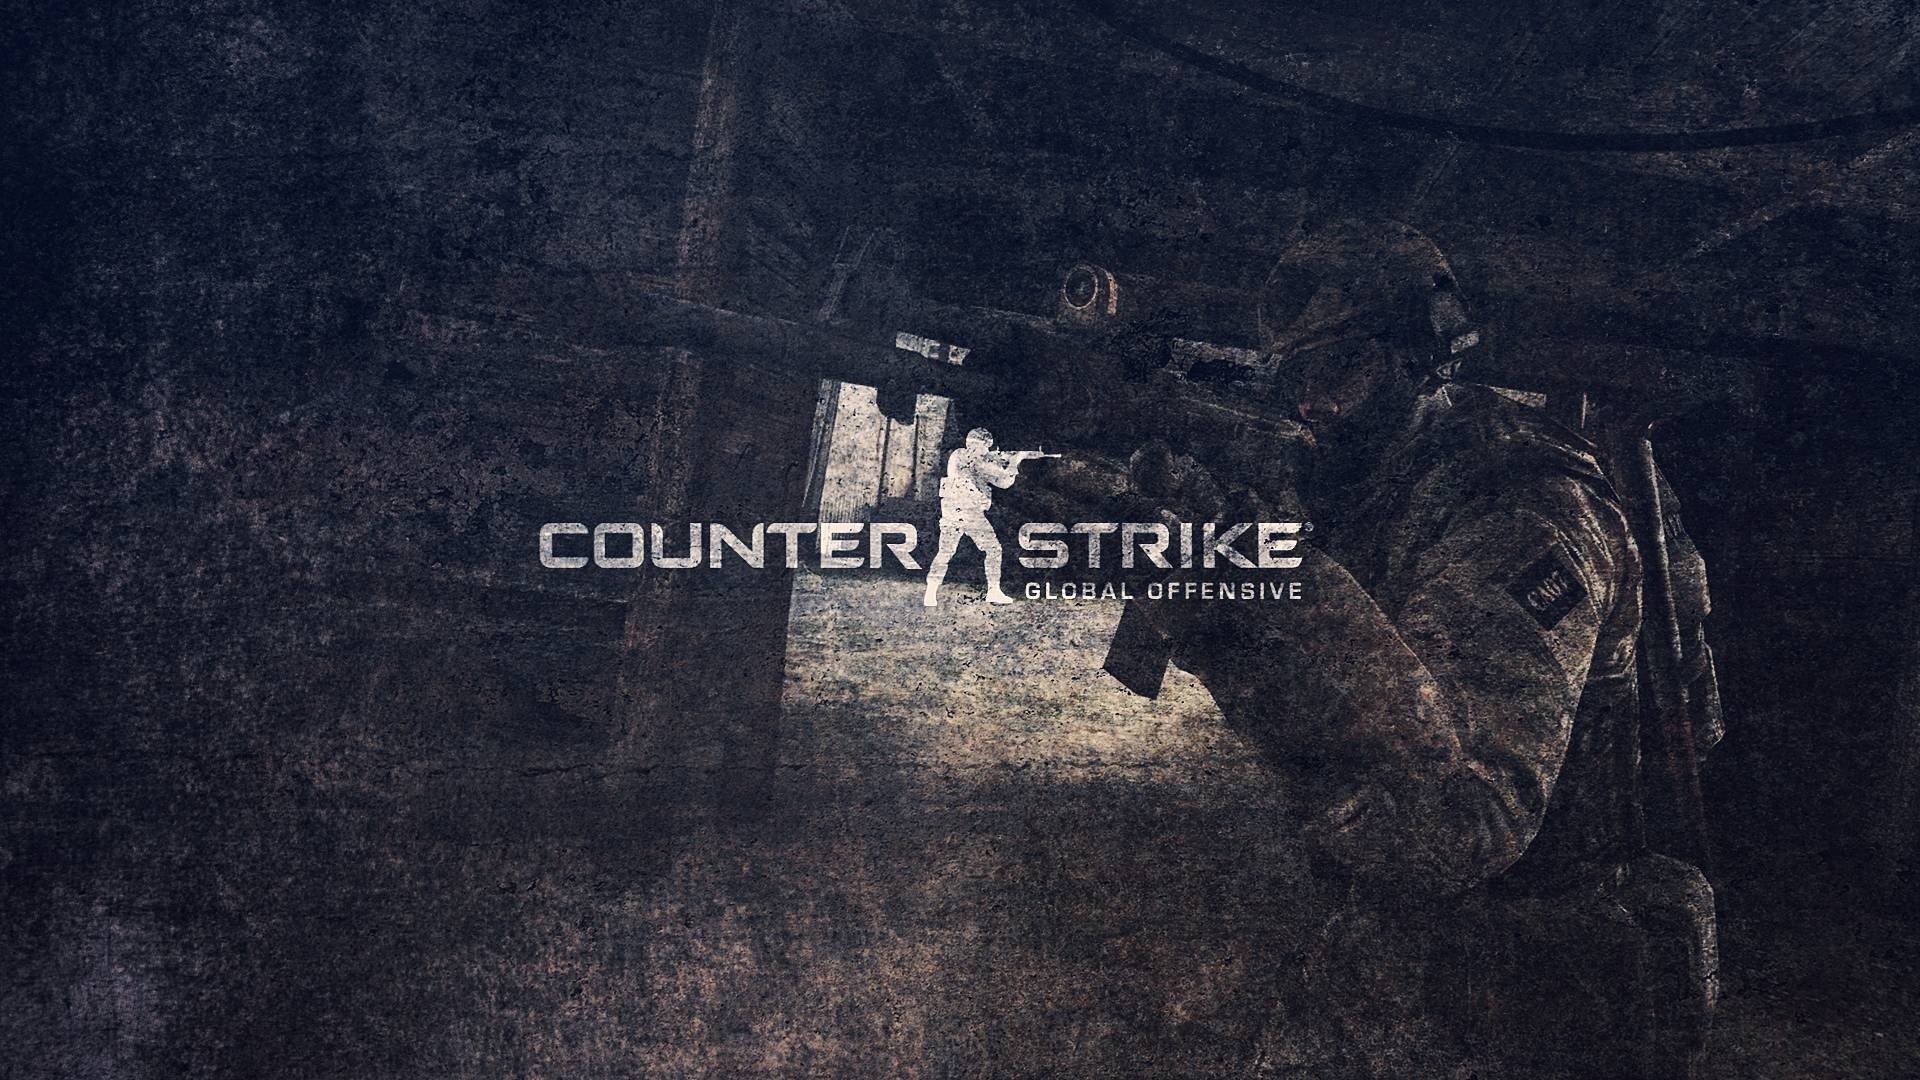 1920x1080 Search Results for “counter-strike global offensive wallpaper” – Adorable  Wallpapers